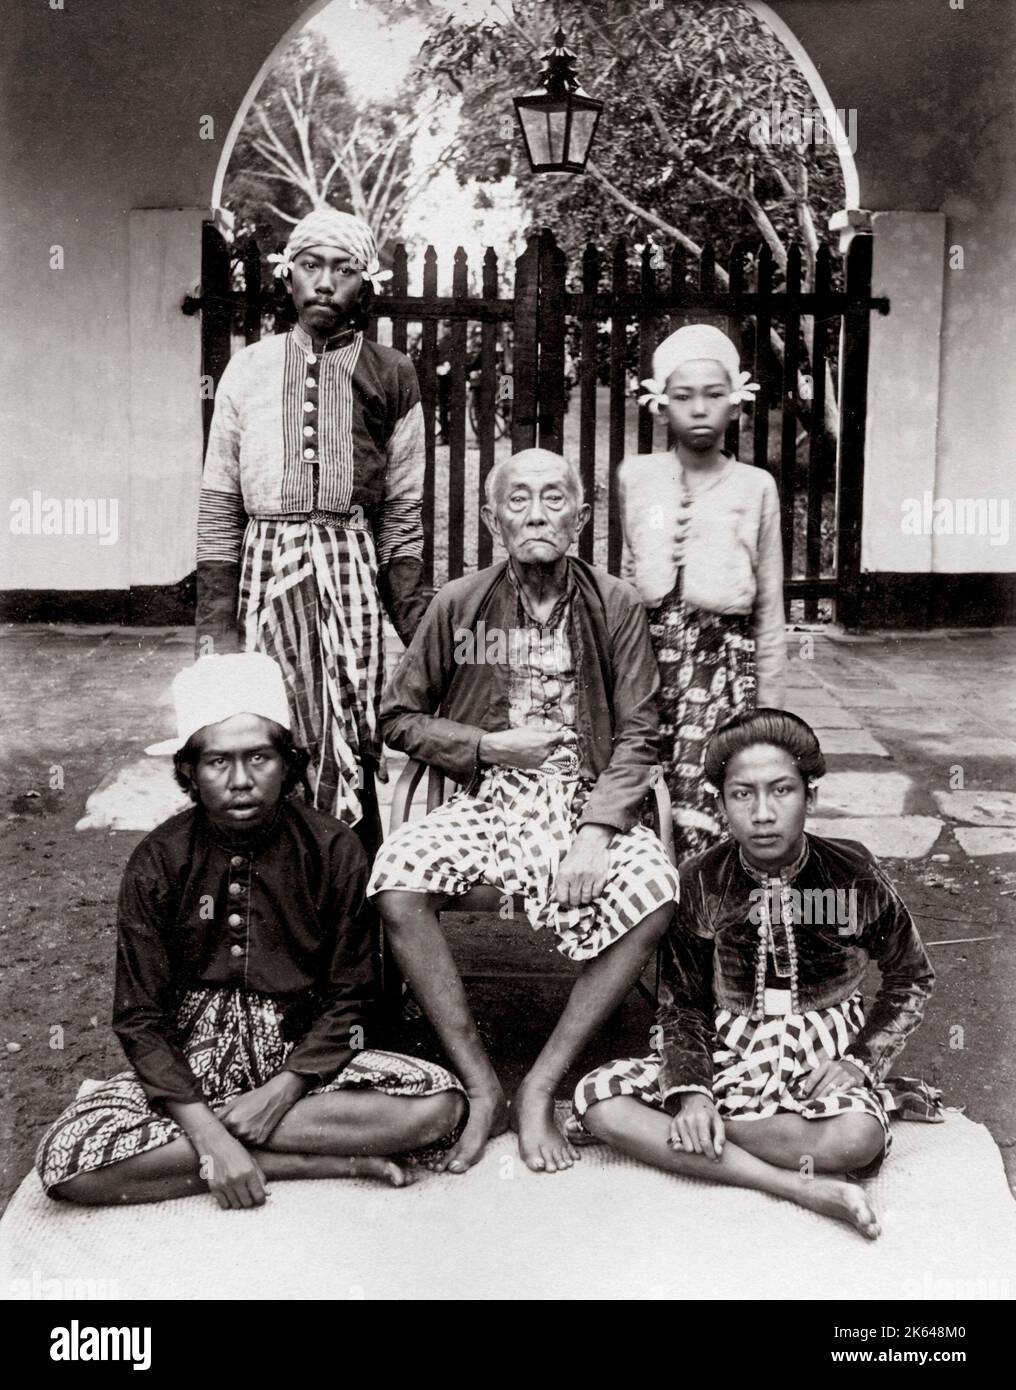 c.1880 South East Asia - the Rajah of Lombok, Indonesia Stock Photo